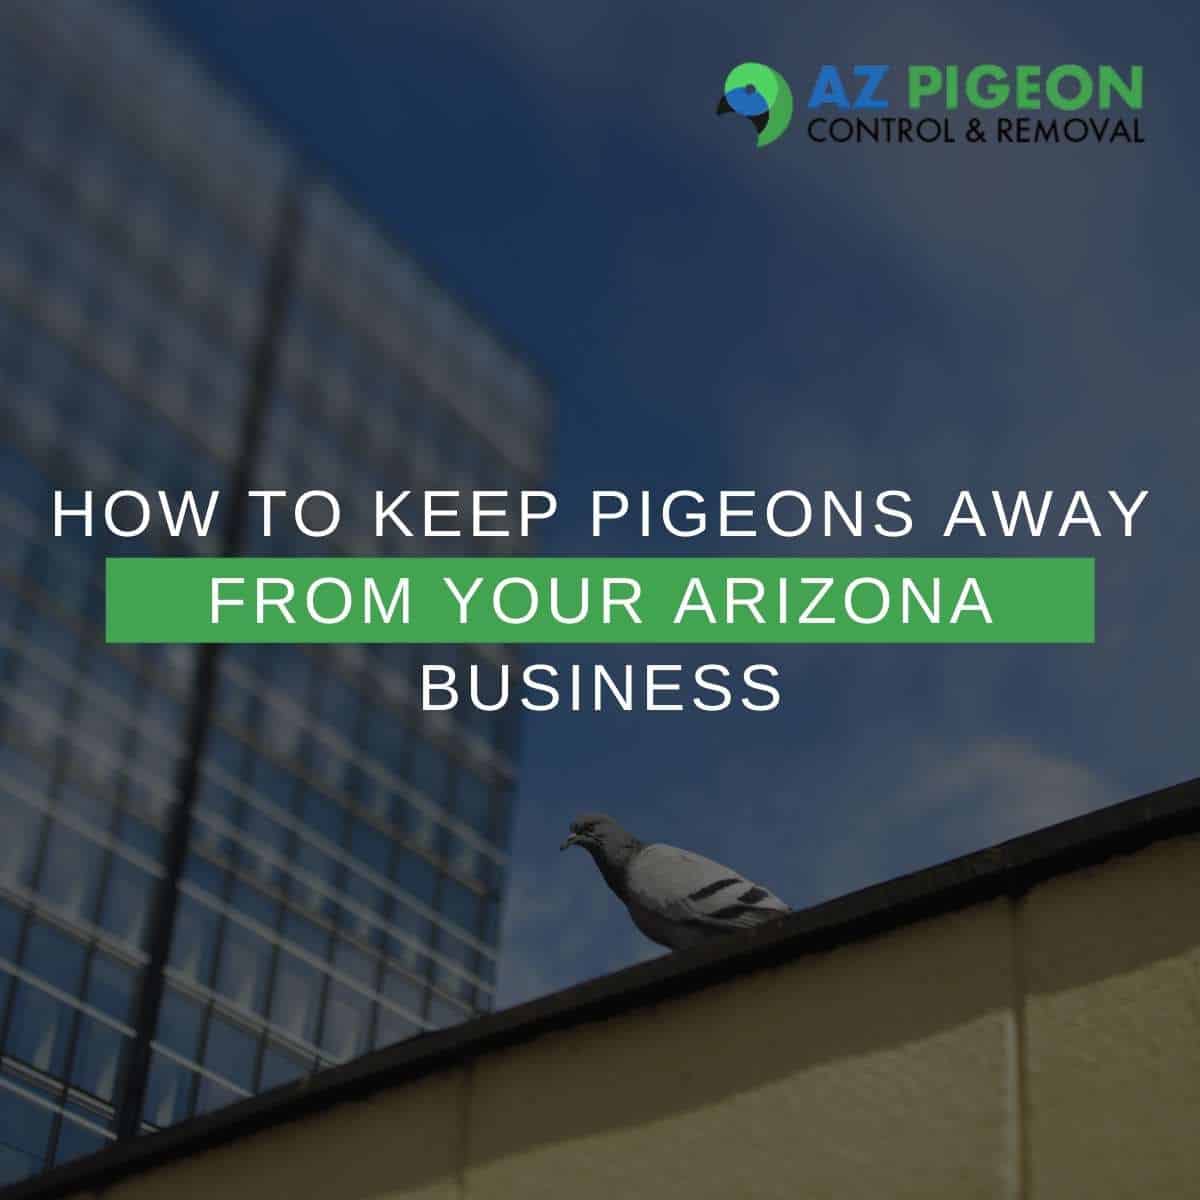 How To Keep Pigeons Away From Your Arizona Business